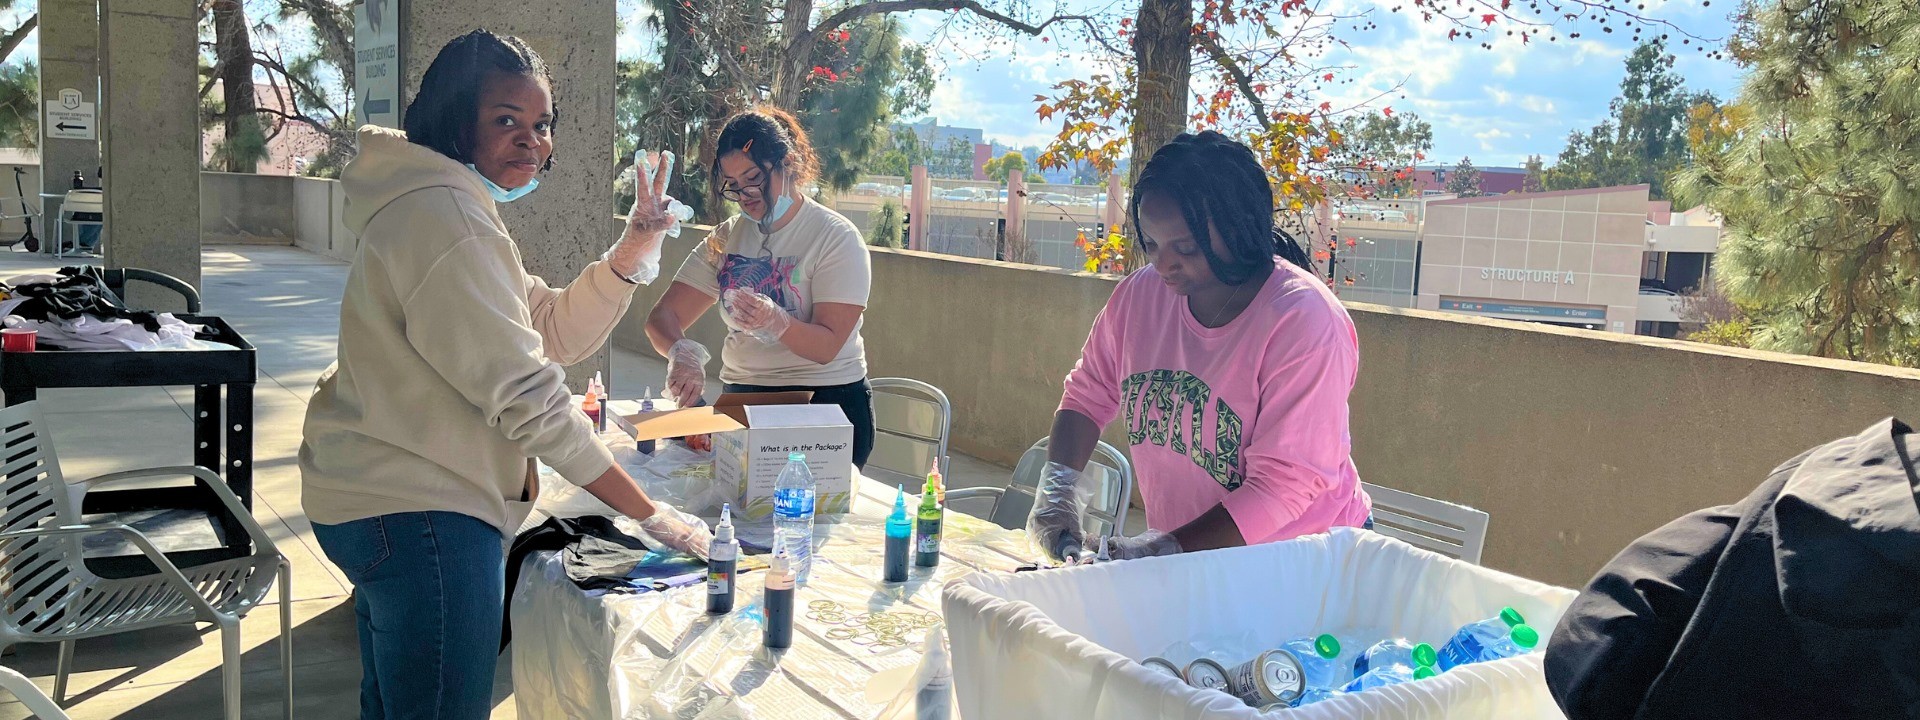 Three students smiling and creating a tie-dye shirt.